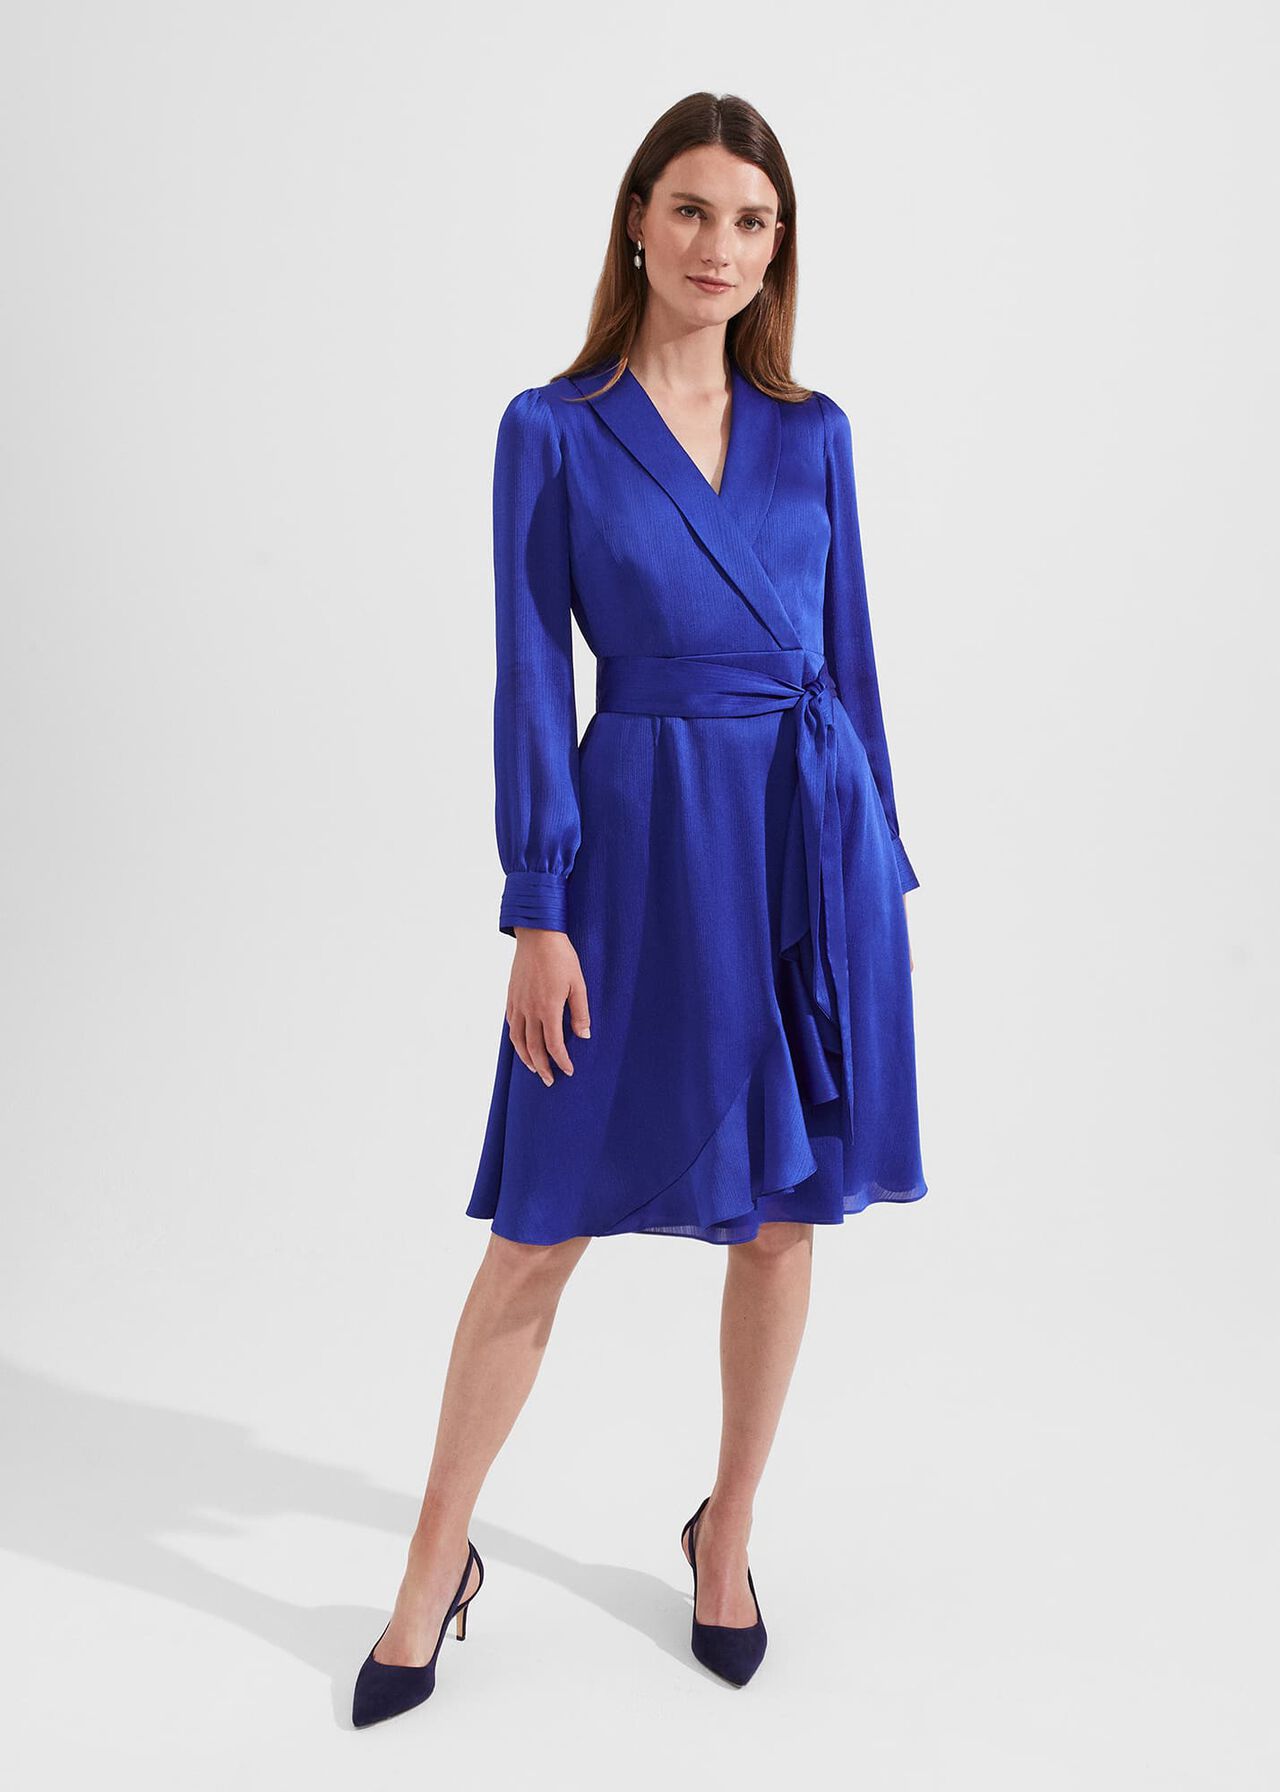 Sally Satin Fit And Flare Dress | Hobbs UK